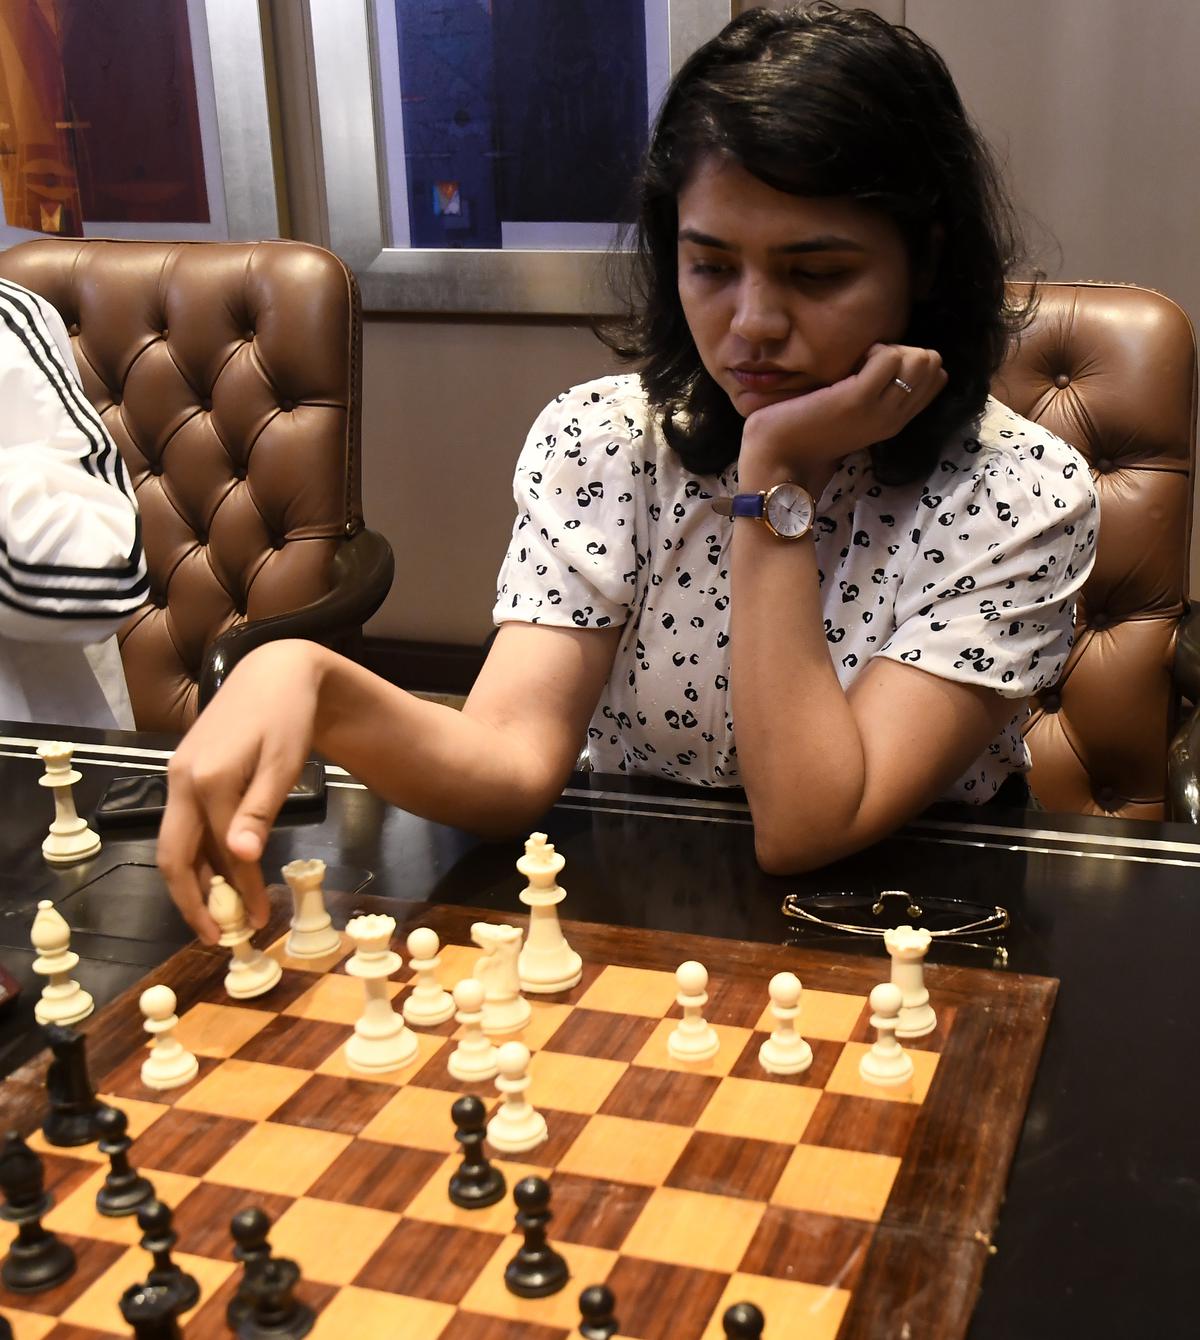 Kamachi TMT Bars - Wishing all the best to team India & all the  participants of the Chennai Chess Olympiad 2022. #chessgame  #chessolympiad2022 #chessington #chessboard #chessmaster #chessmoves  #chesslover #ChessChennai2022 #CHESSCLUB #ChessOlympiad